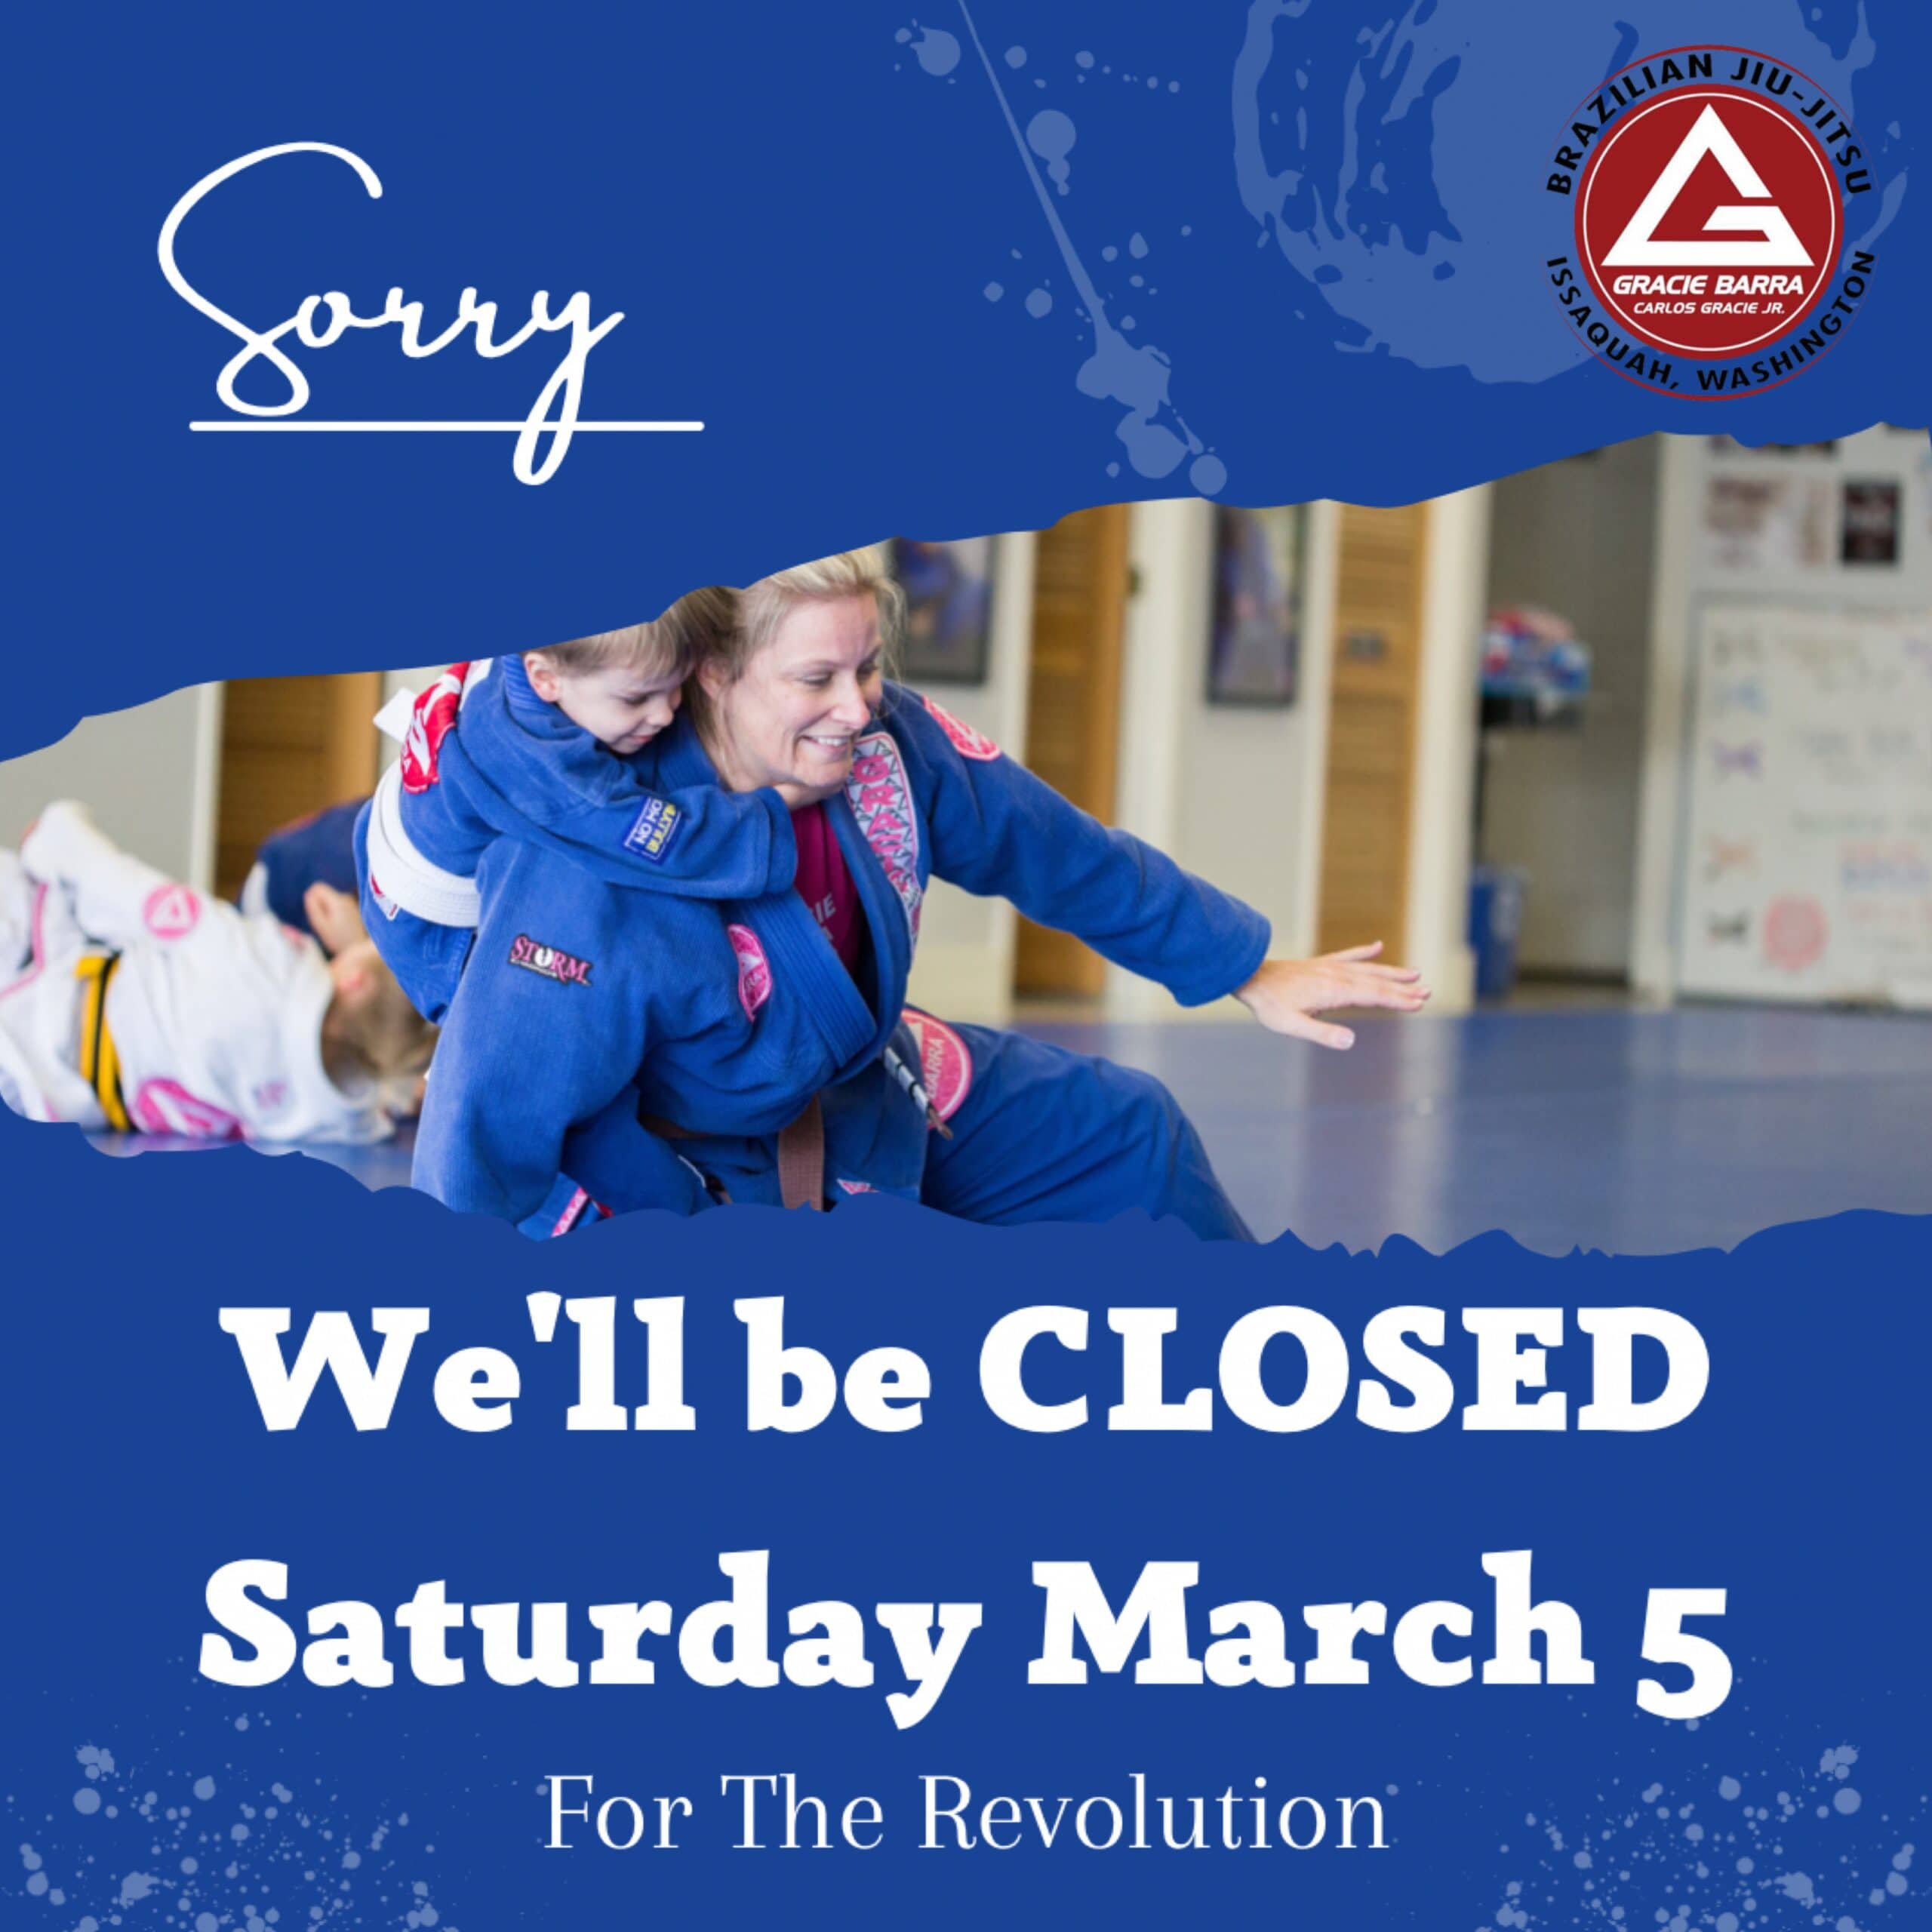 Closed for the revolUtion